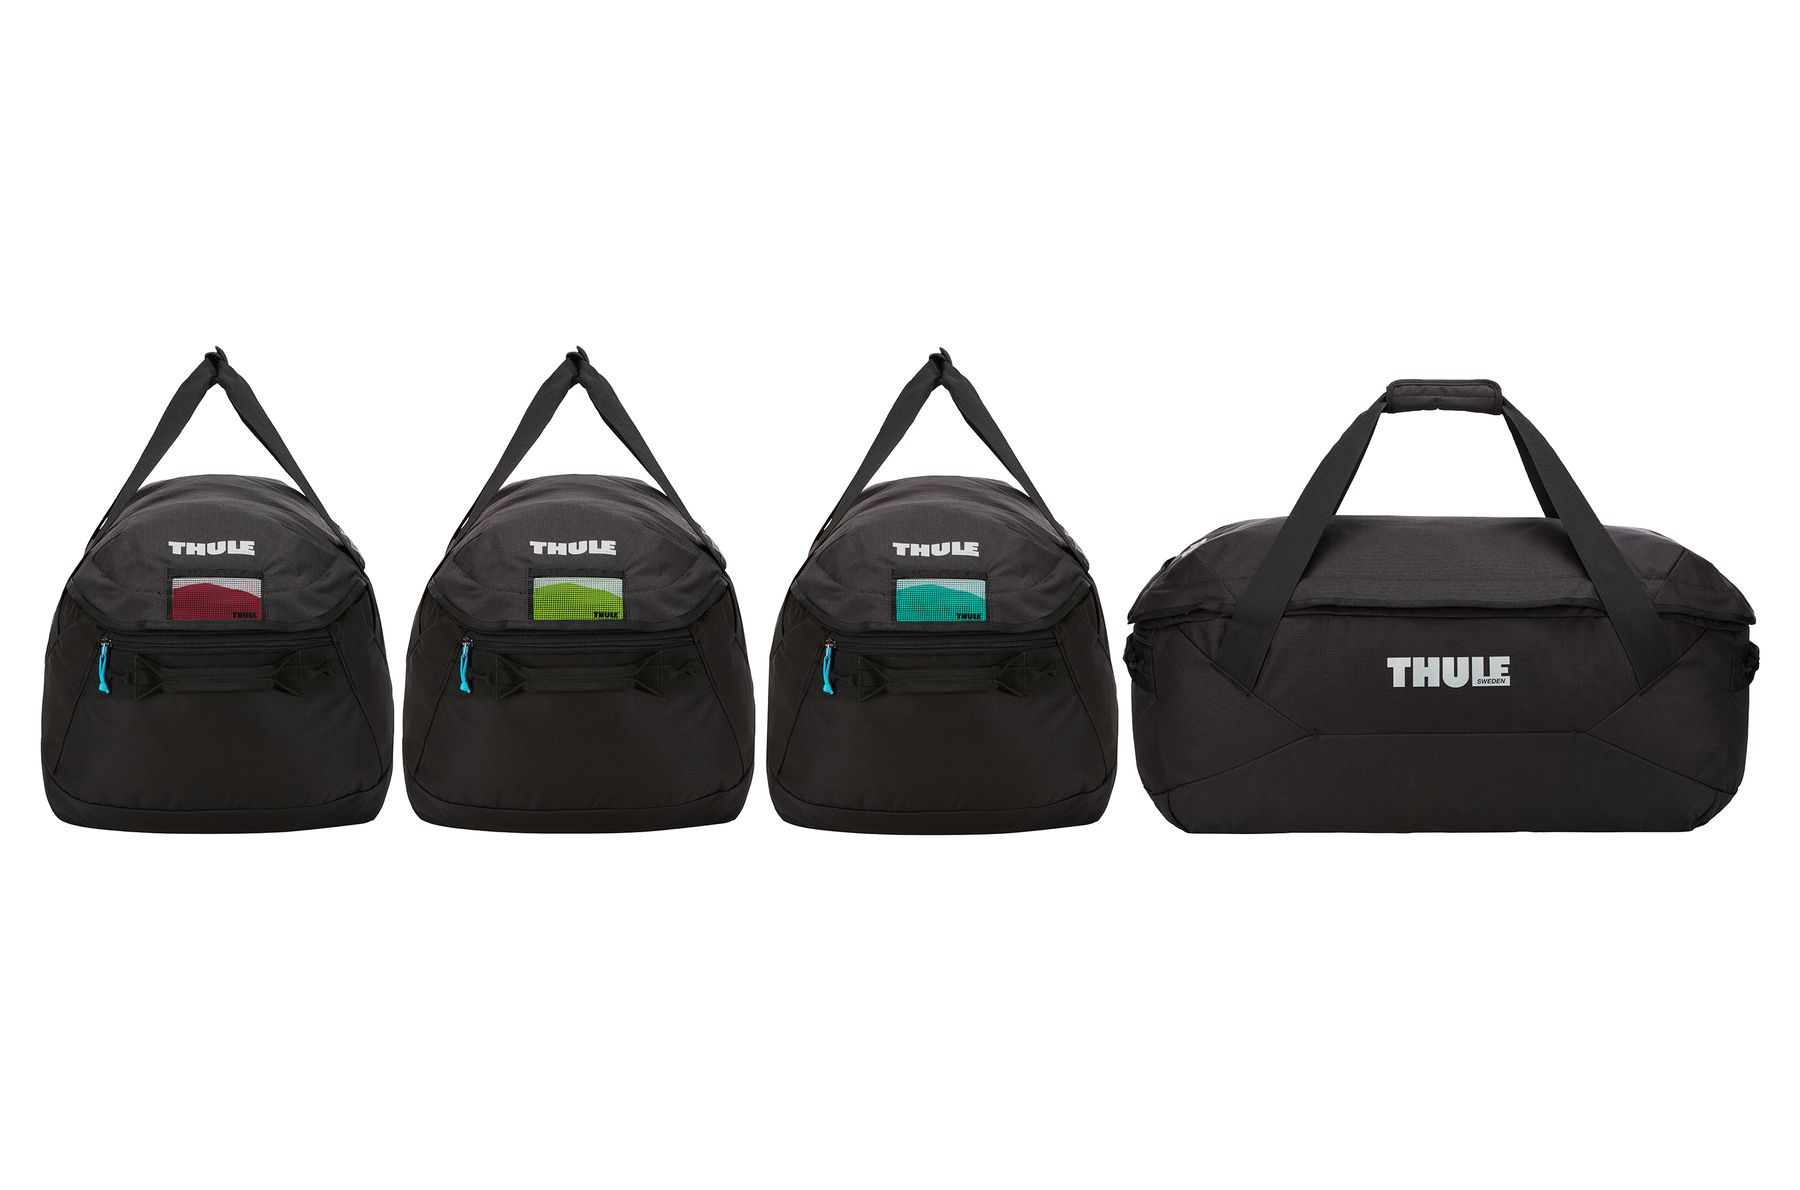 Roof Box Cargo Carry Bags Thule 800603 Go Pack Set of 4 Holdall 